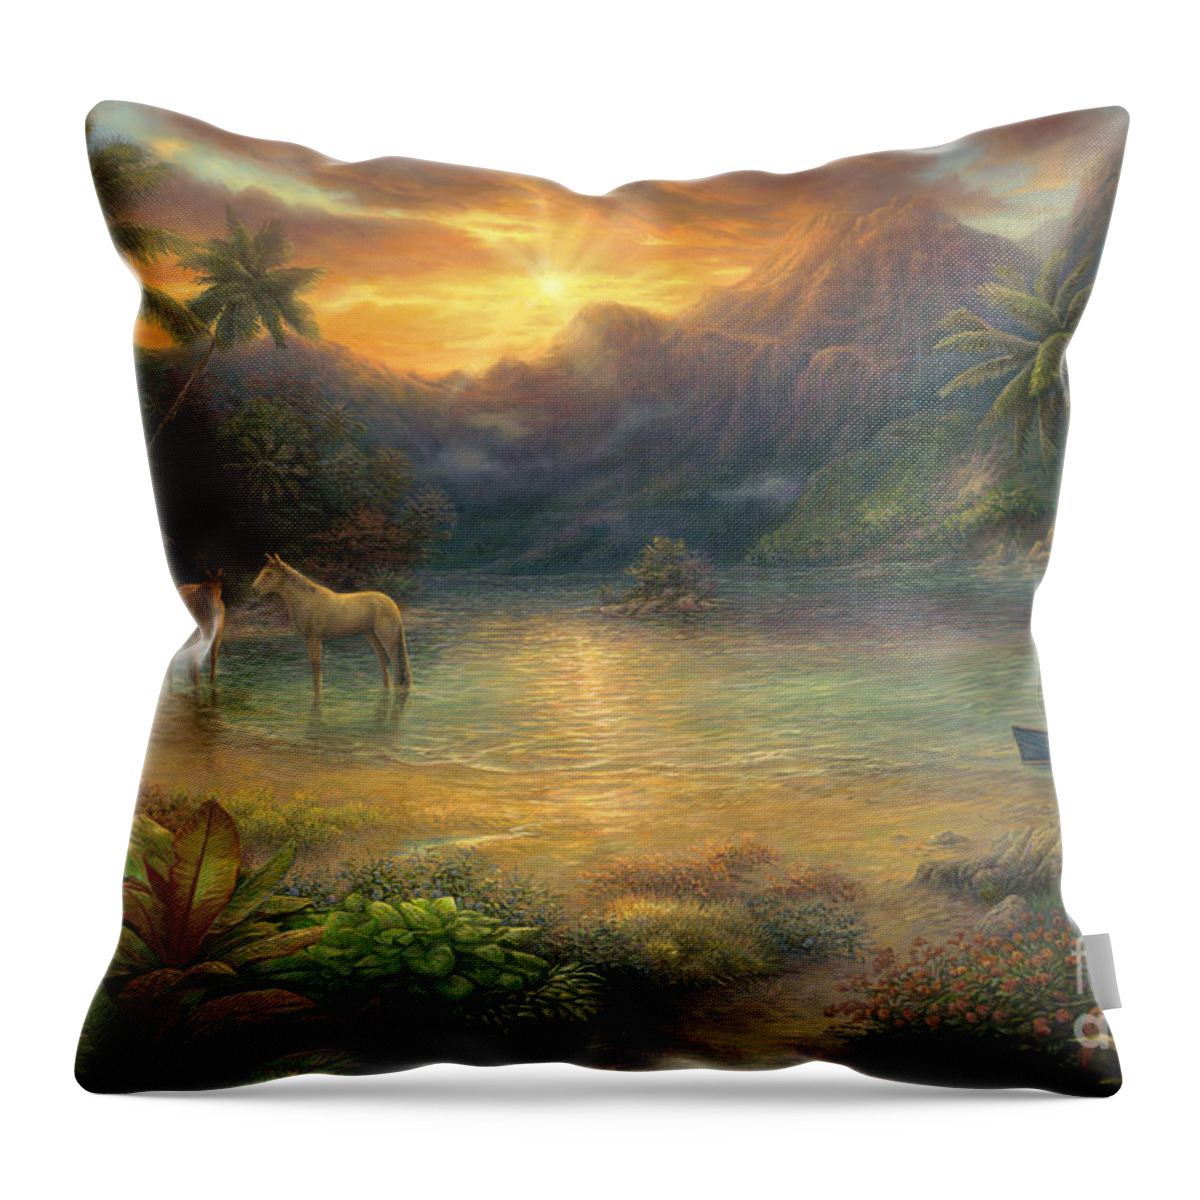 Tropical Picture Throw Pillow featuring the painting Escape to Tranquility by Chuck Pinson